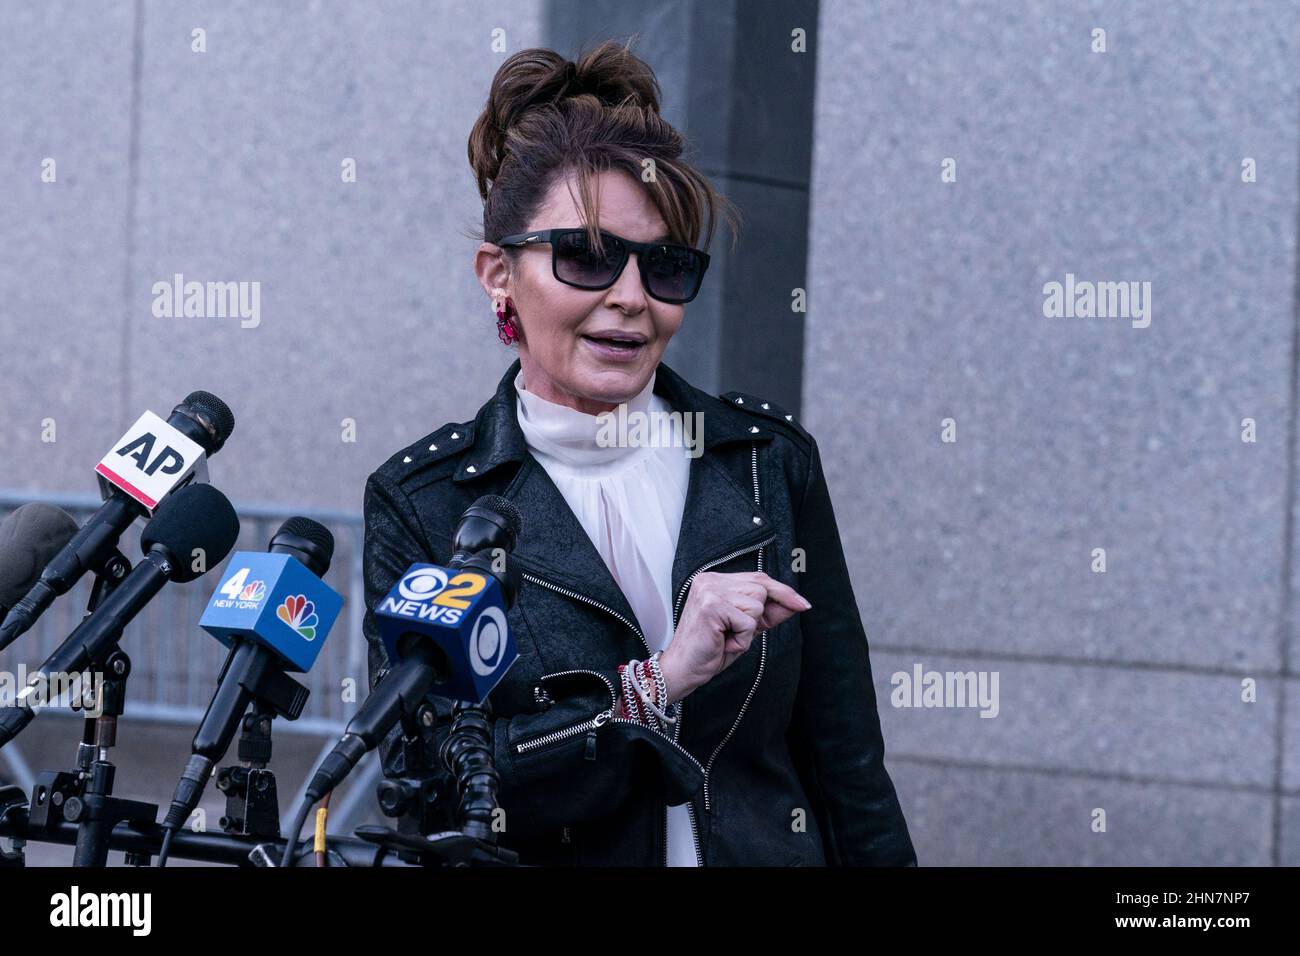 New York, NY - February 14, 2022: Sarah Palin, former Governor of Alaska leaves court after judge Jed Rakoff dismissed her libel case at U.S. Southern District Court Stock Photo